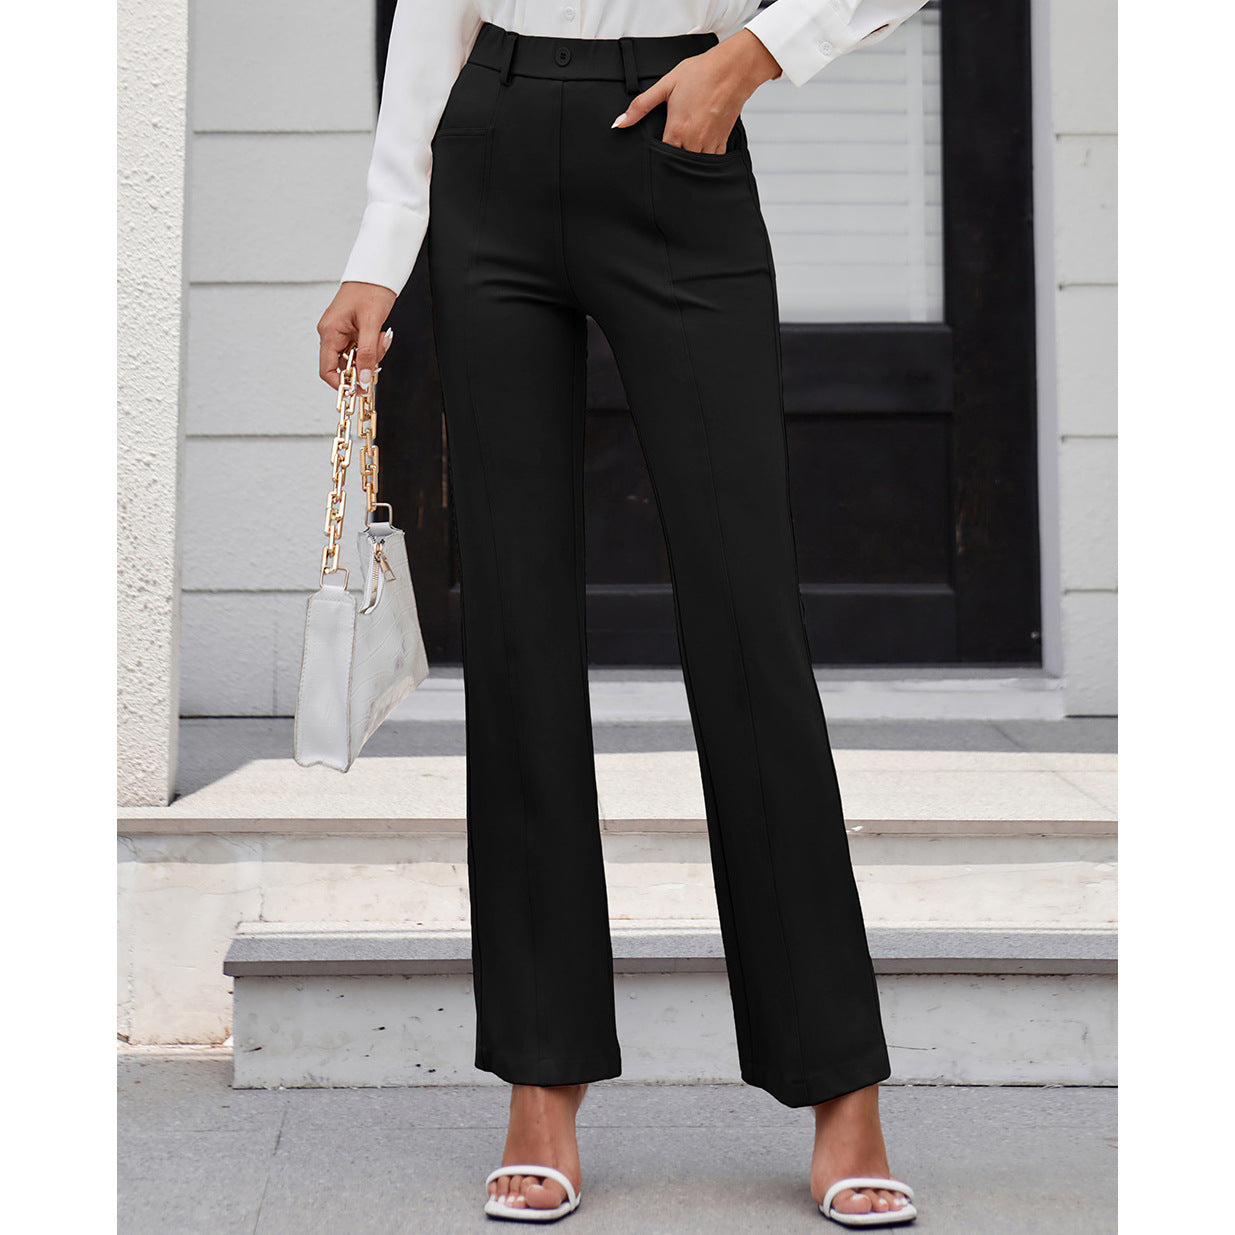 Women Clothing Solid Color Pocket Work Pant